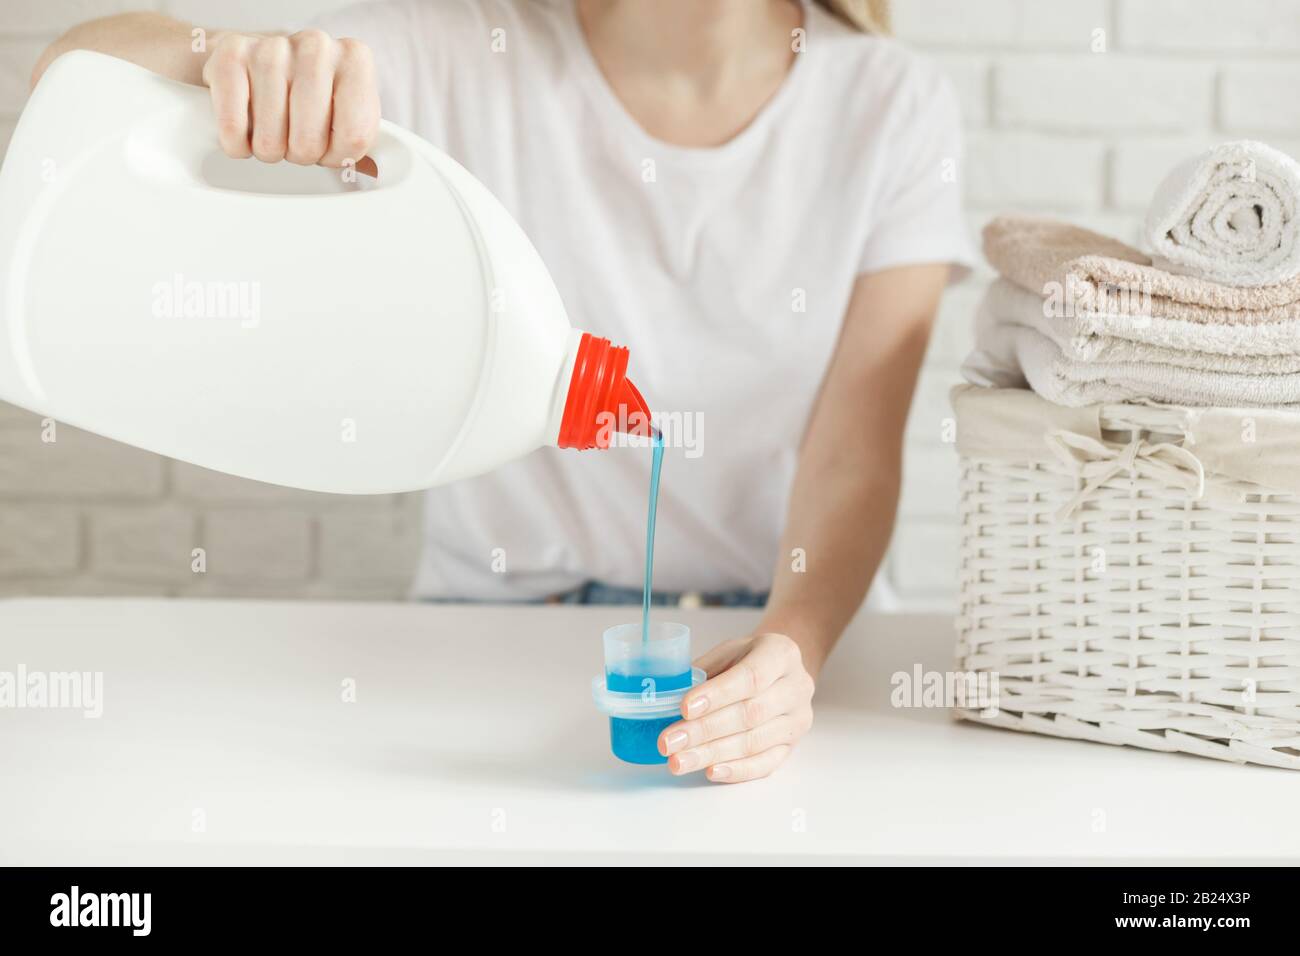 Woman Adding Powdered Detergent Into Basin With Clothes, Top View. Hand  Washing Laundry Stock Photo, Picture and Royalty Free Image. Image  185079898.